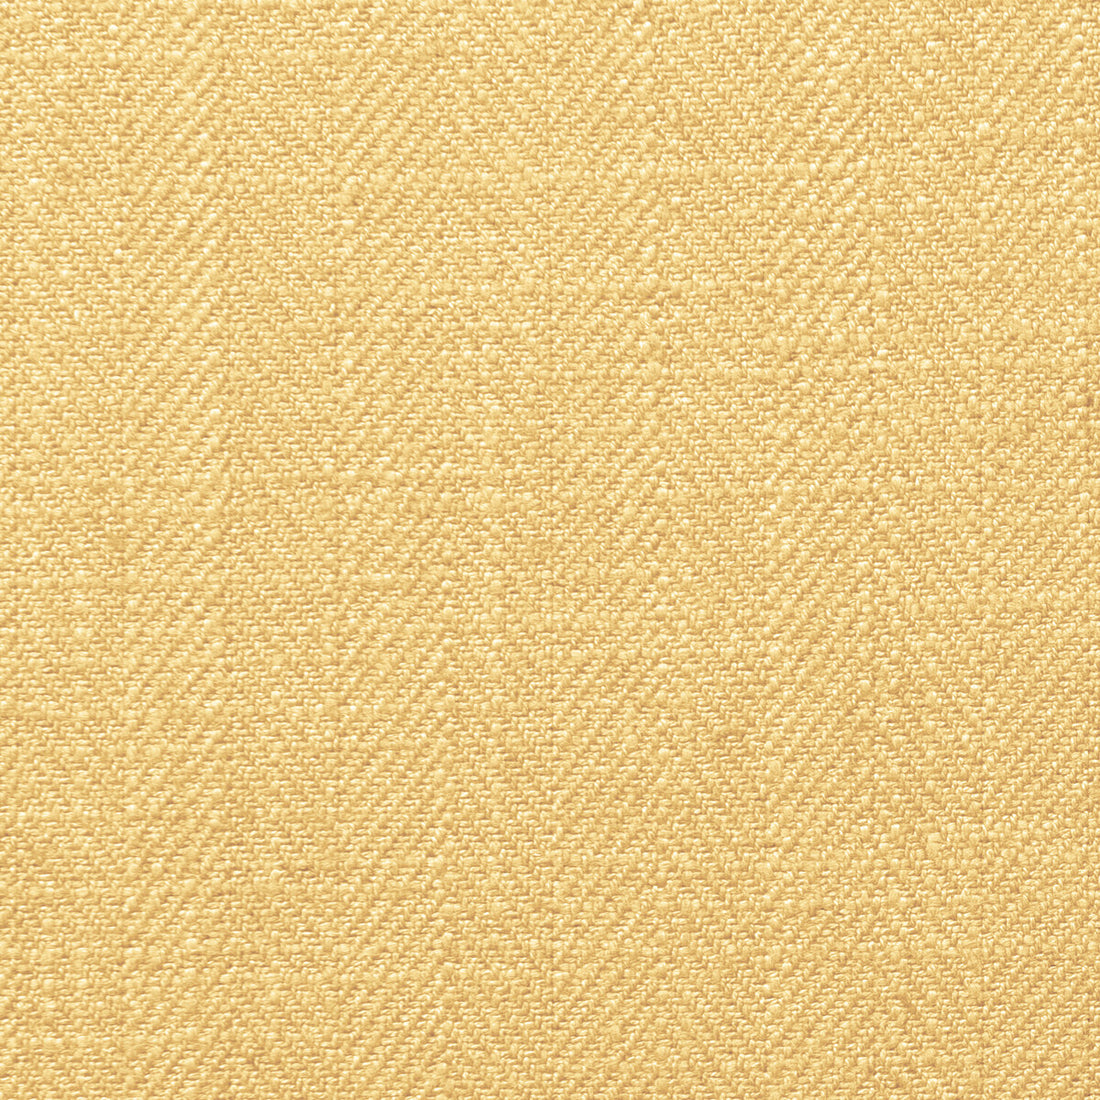 Henley fabric in sunflower color - pattern F0648/38.CAC.0 - by Clarke And Clarke in the Clarke &amp; Clarke Henley collection